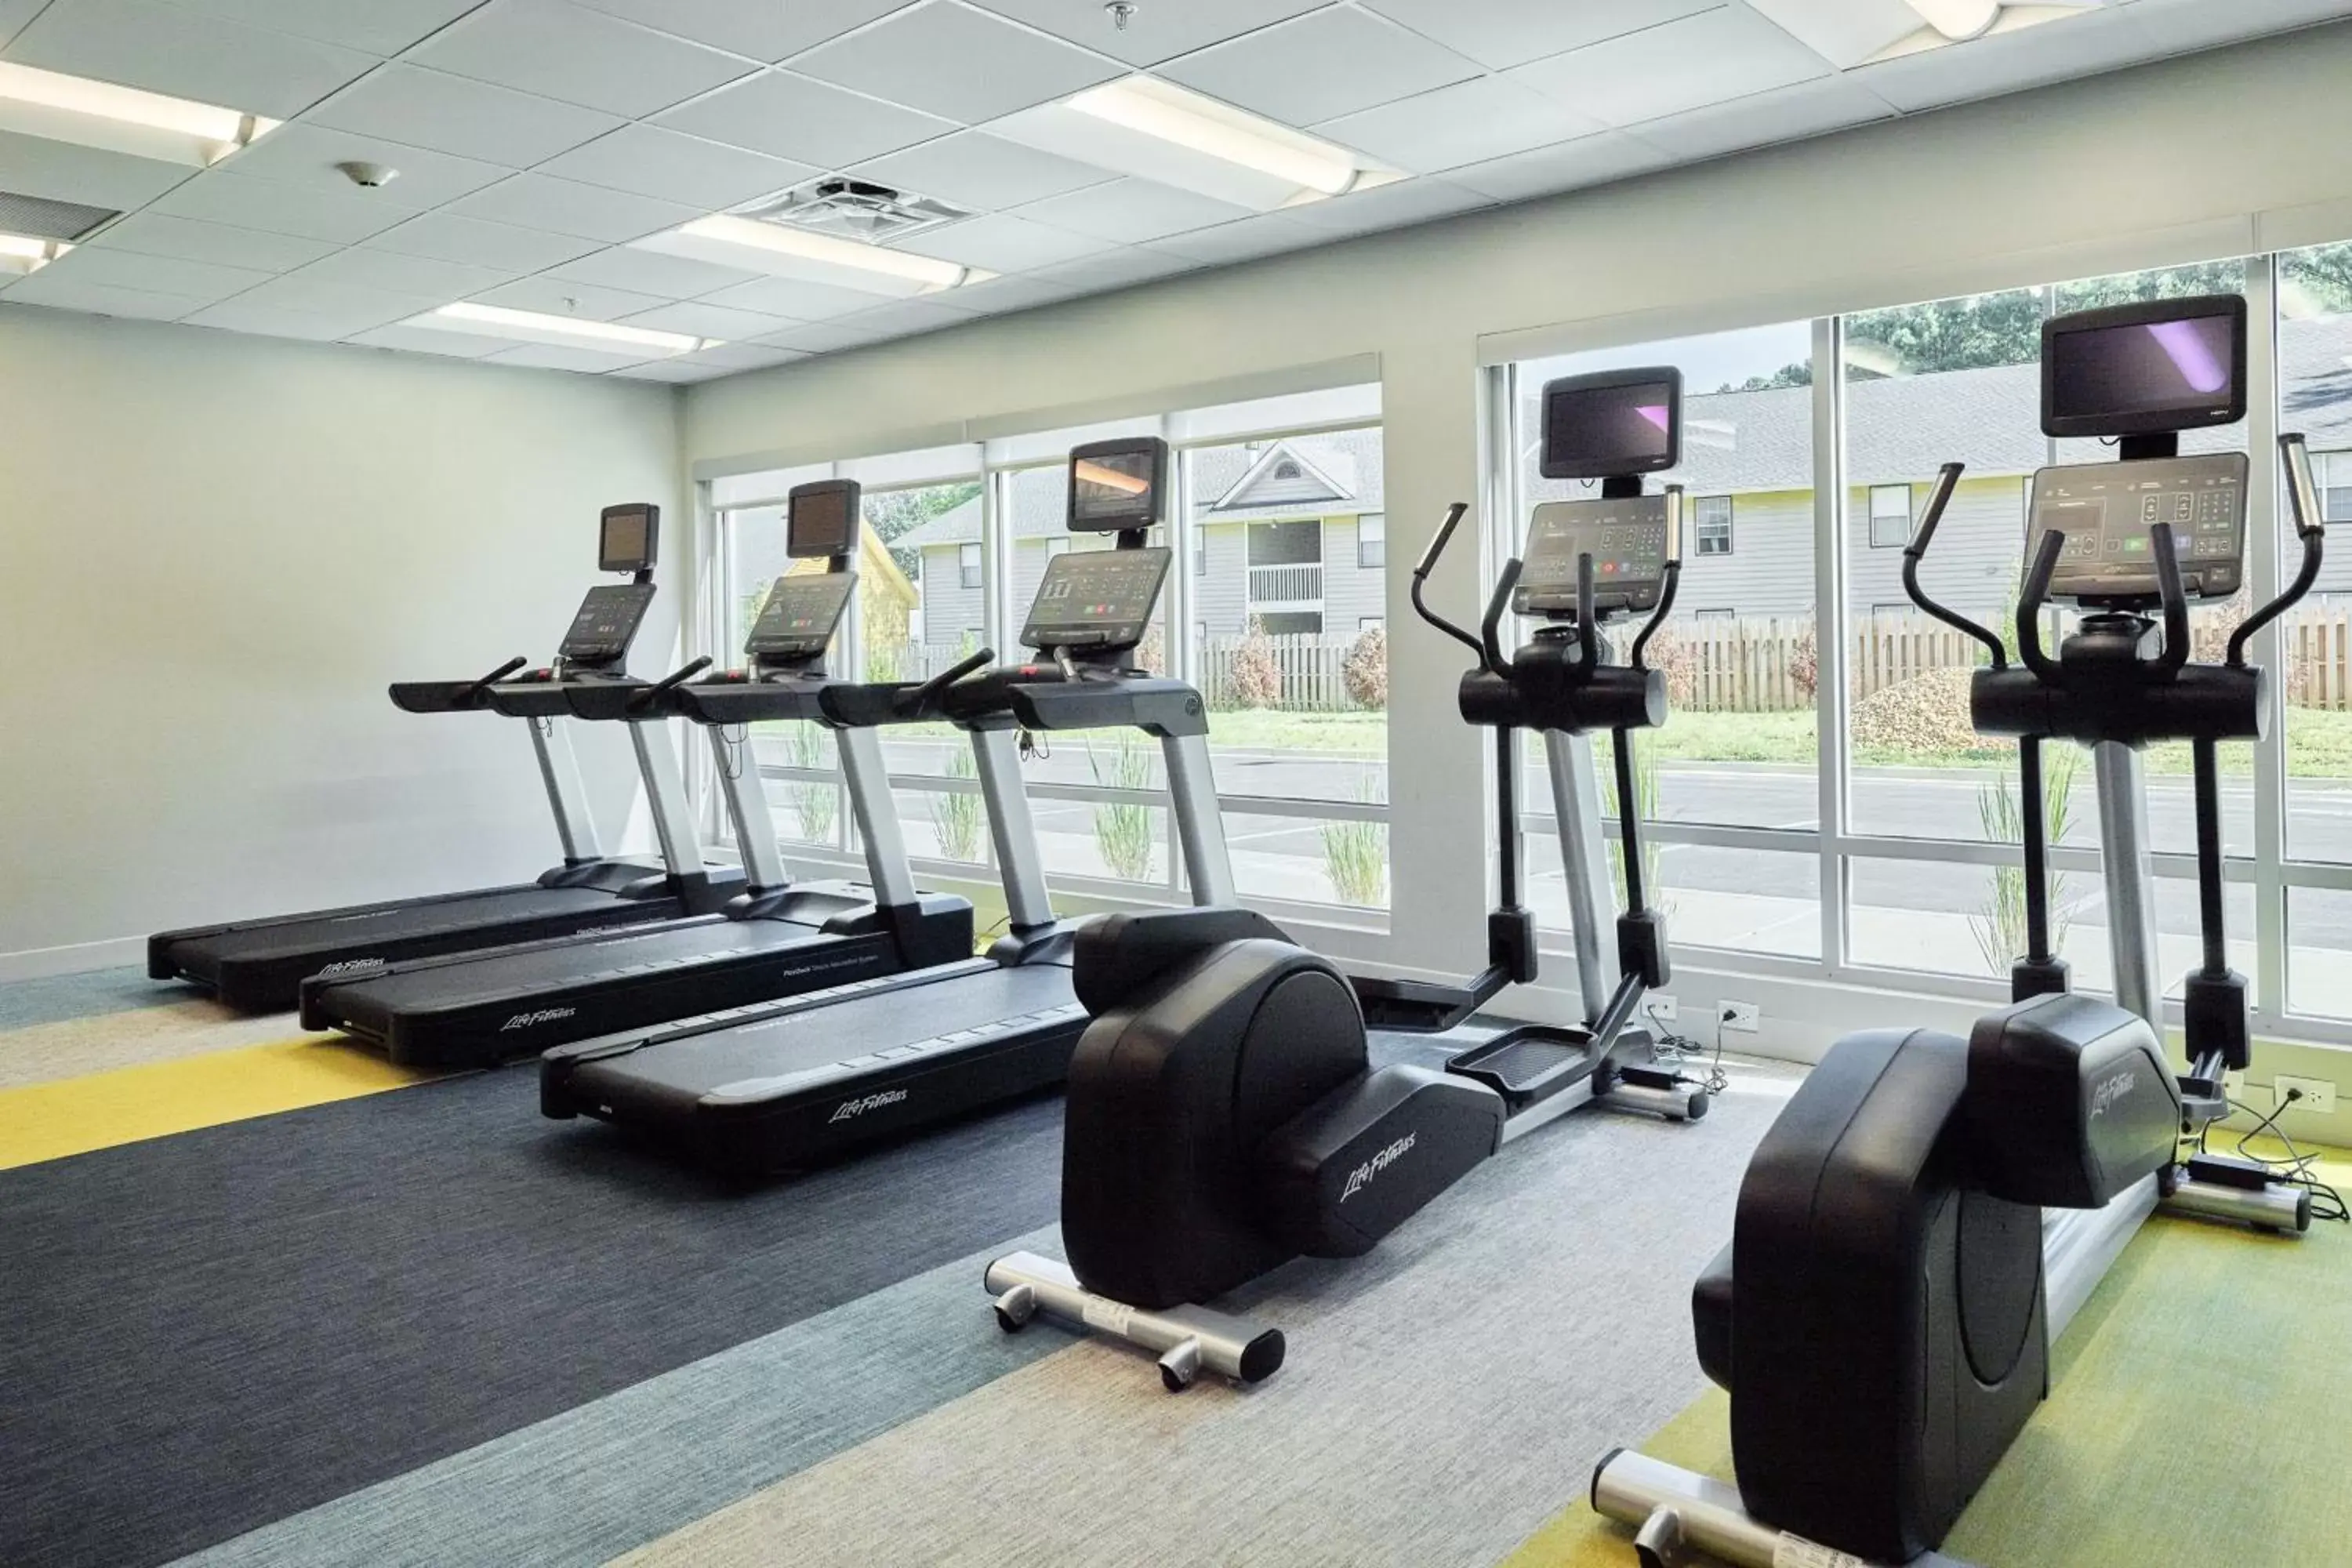 Fitness centre/facilities, Fitness Center/Facilities in TownePlace Suites by Marriott Chattanooga South, East Ridge